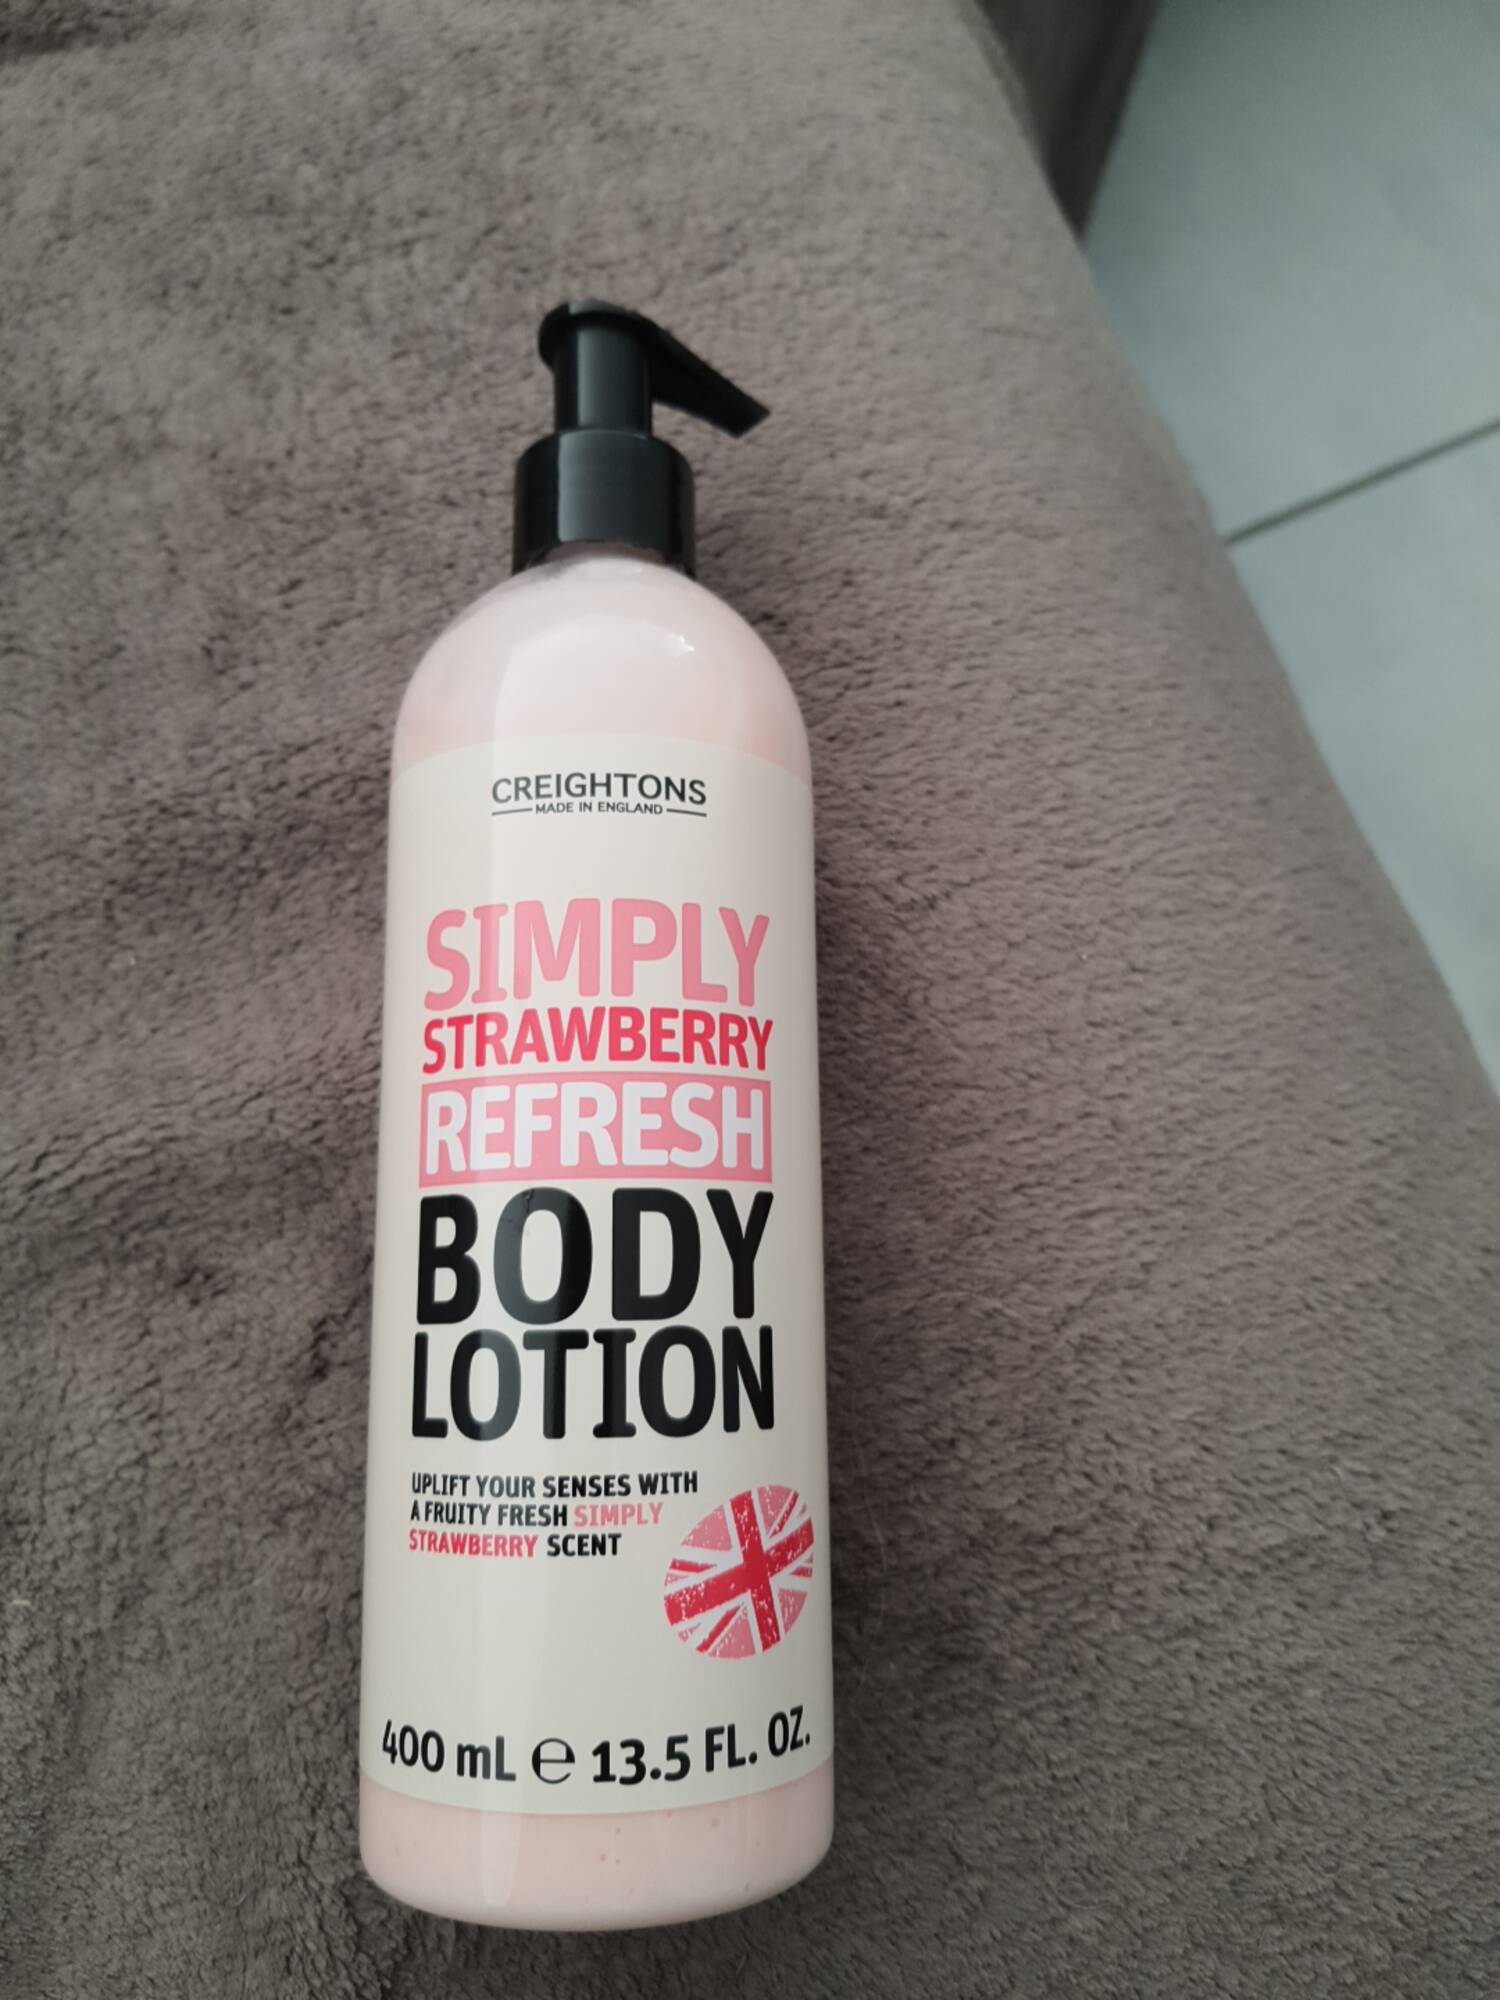 CREIGHTONS - Simply strawberry refresh - Body lotion